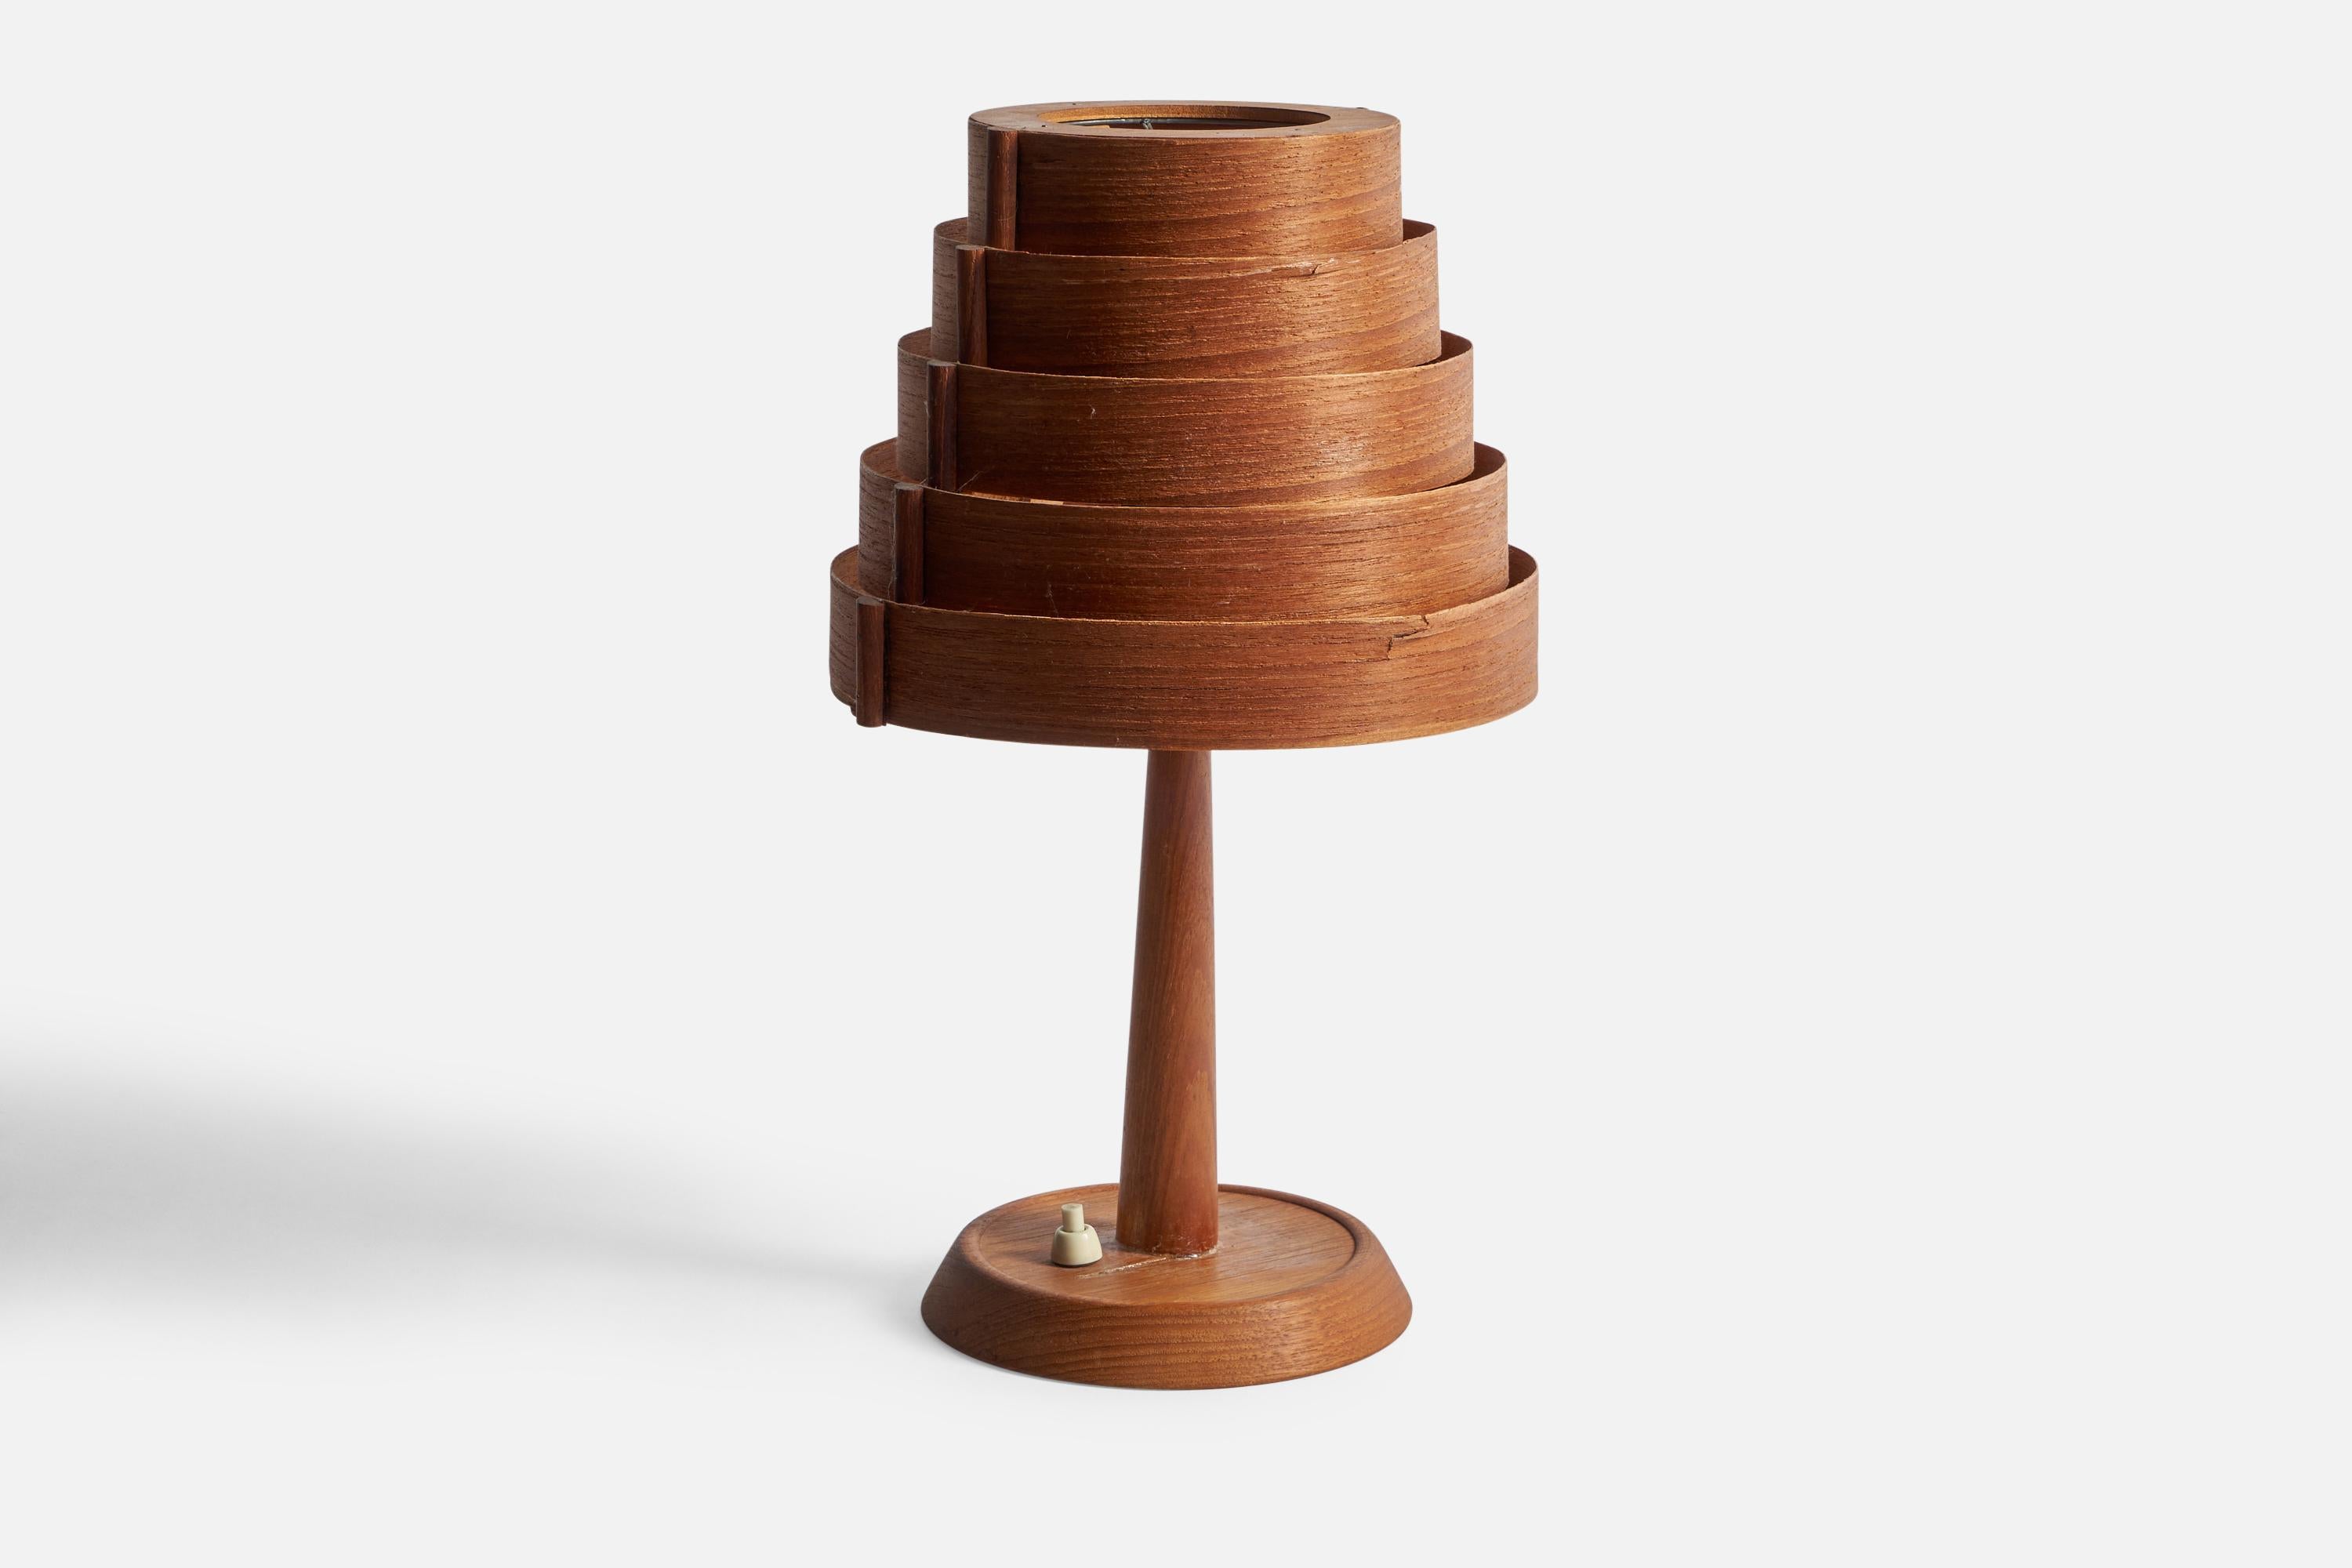 A pine and moulded pine veneer table lamp designed and produced in Sweden, 1970s.

Overall Dimensions (inches): 13.75” H x 8” Diameter
Bulb Specifications: E-26 Bulb
Number of Sockets: 1
All lighting will be converted for US usage. We are unable to